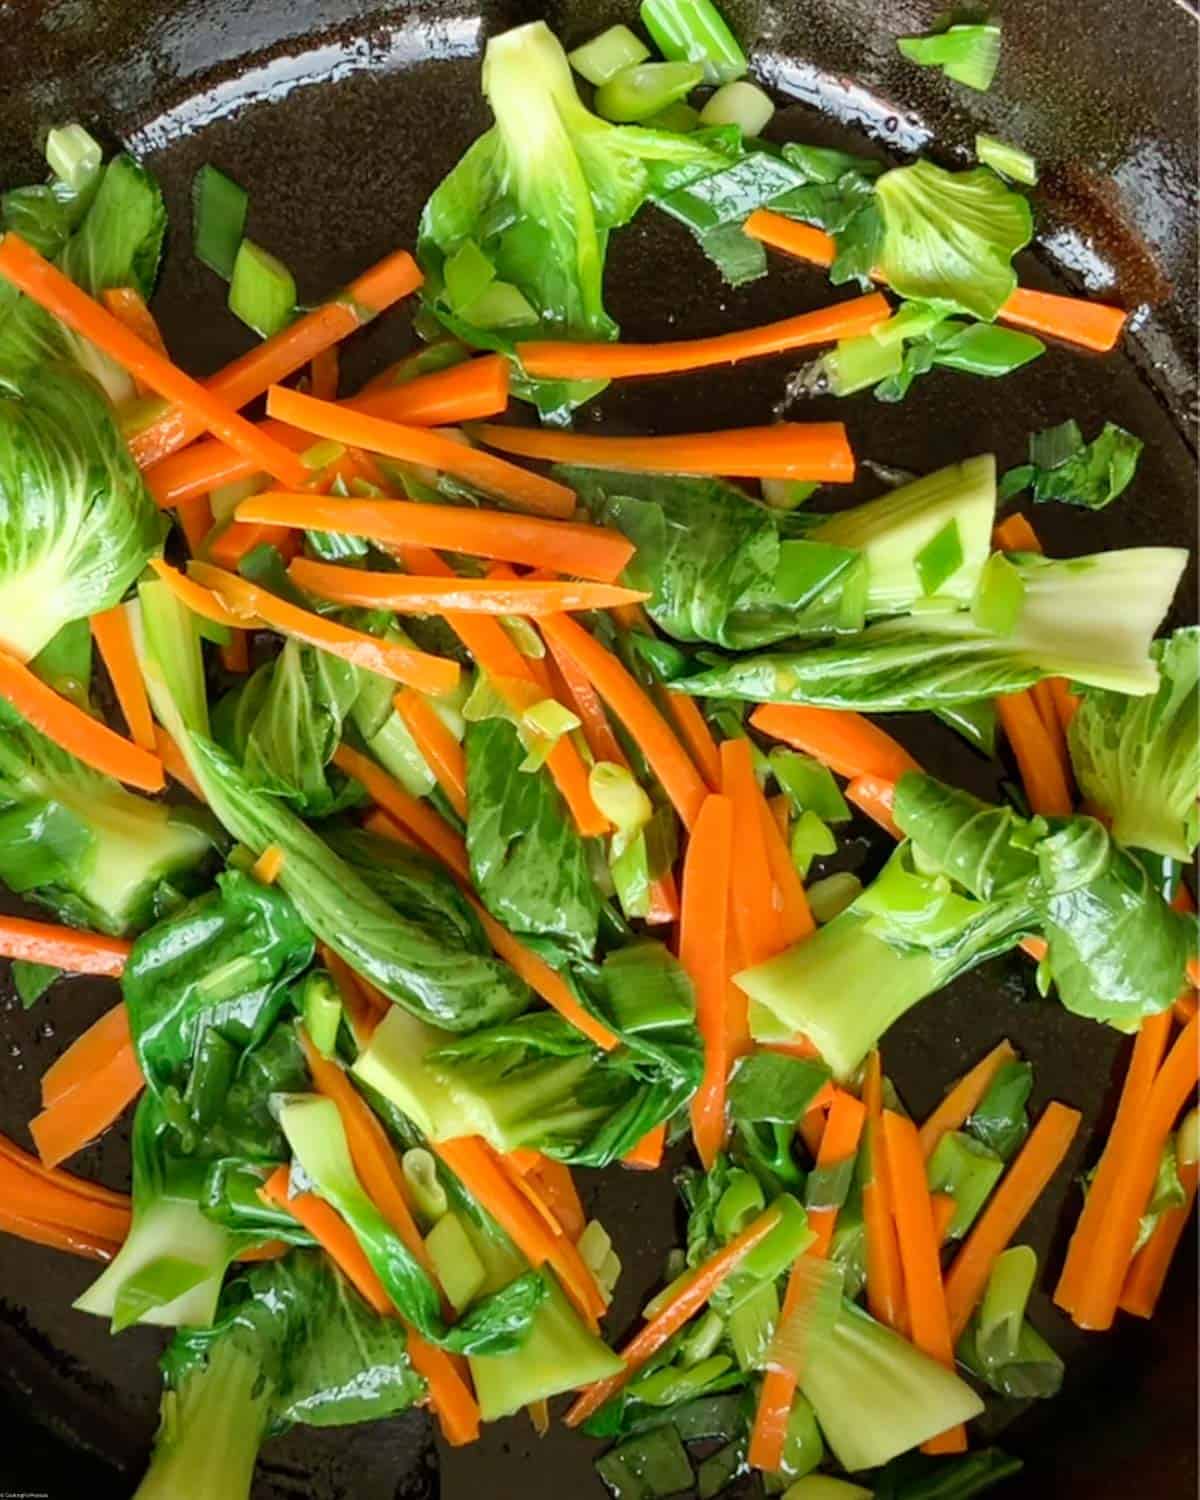 Stir-fry baby bok choy, carrots, and green onions in a large skillet.